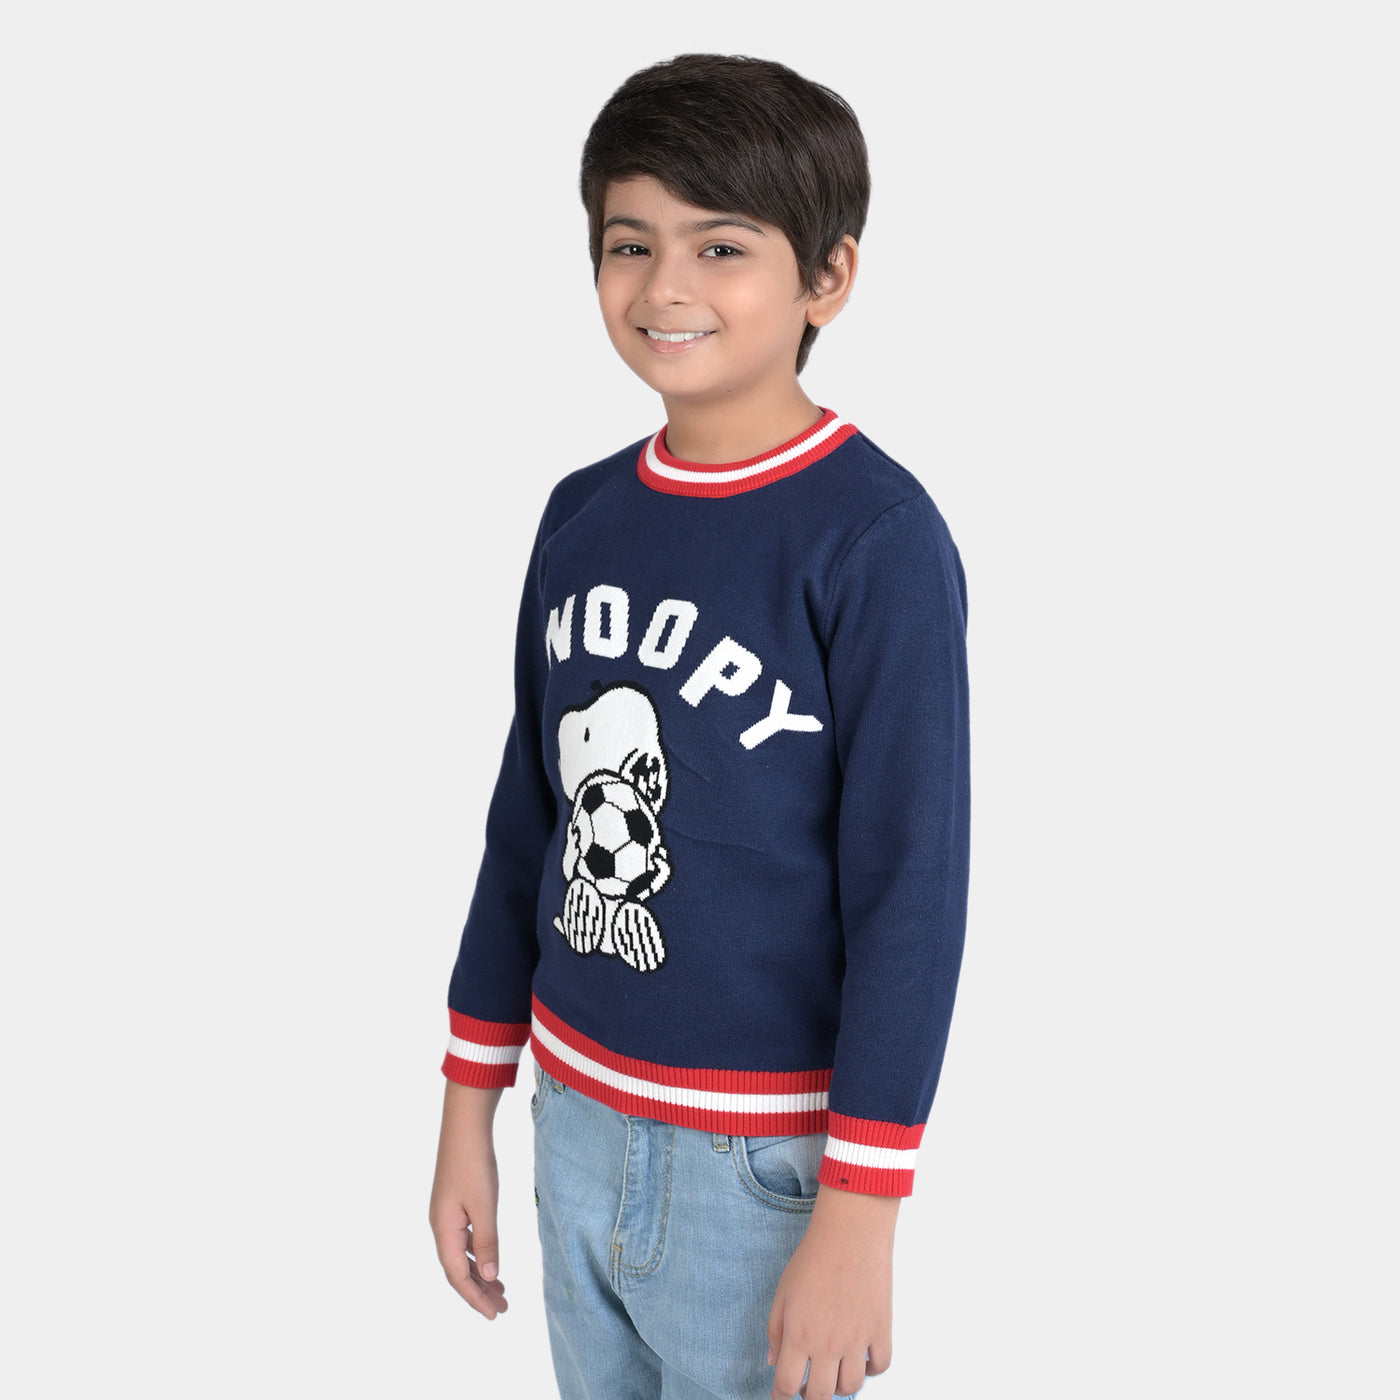 Boys Knitted Sweater Character -Navy